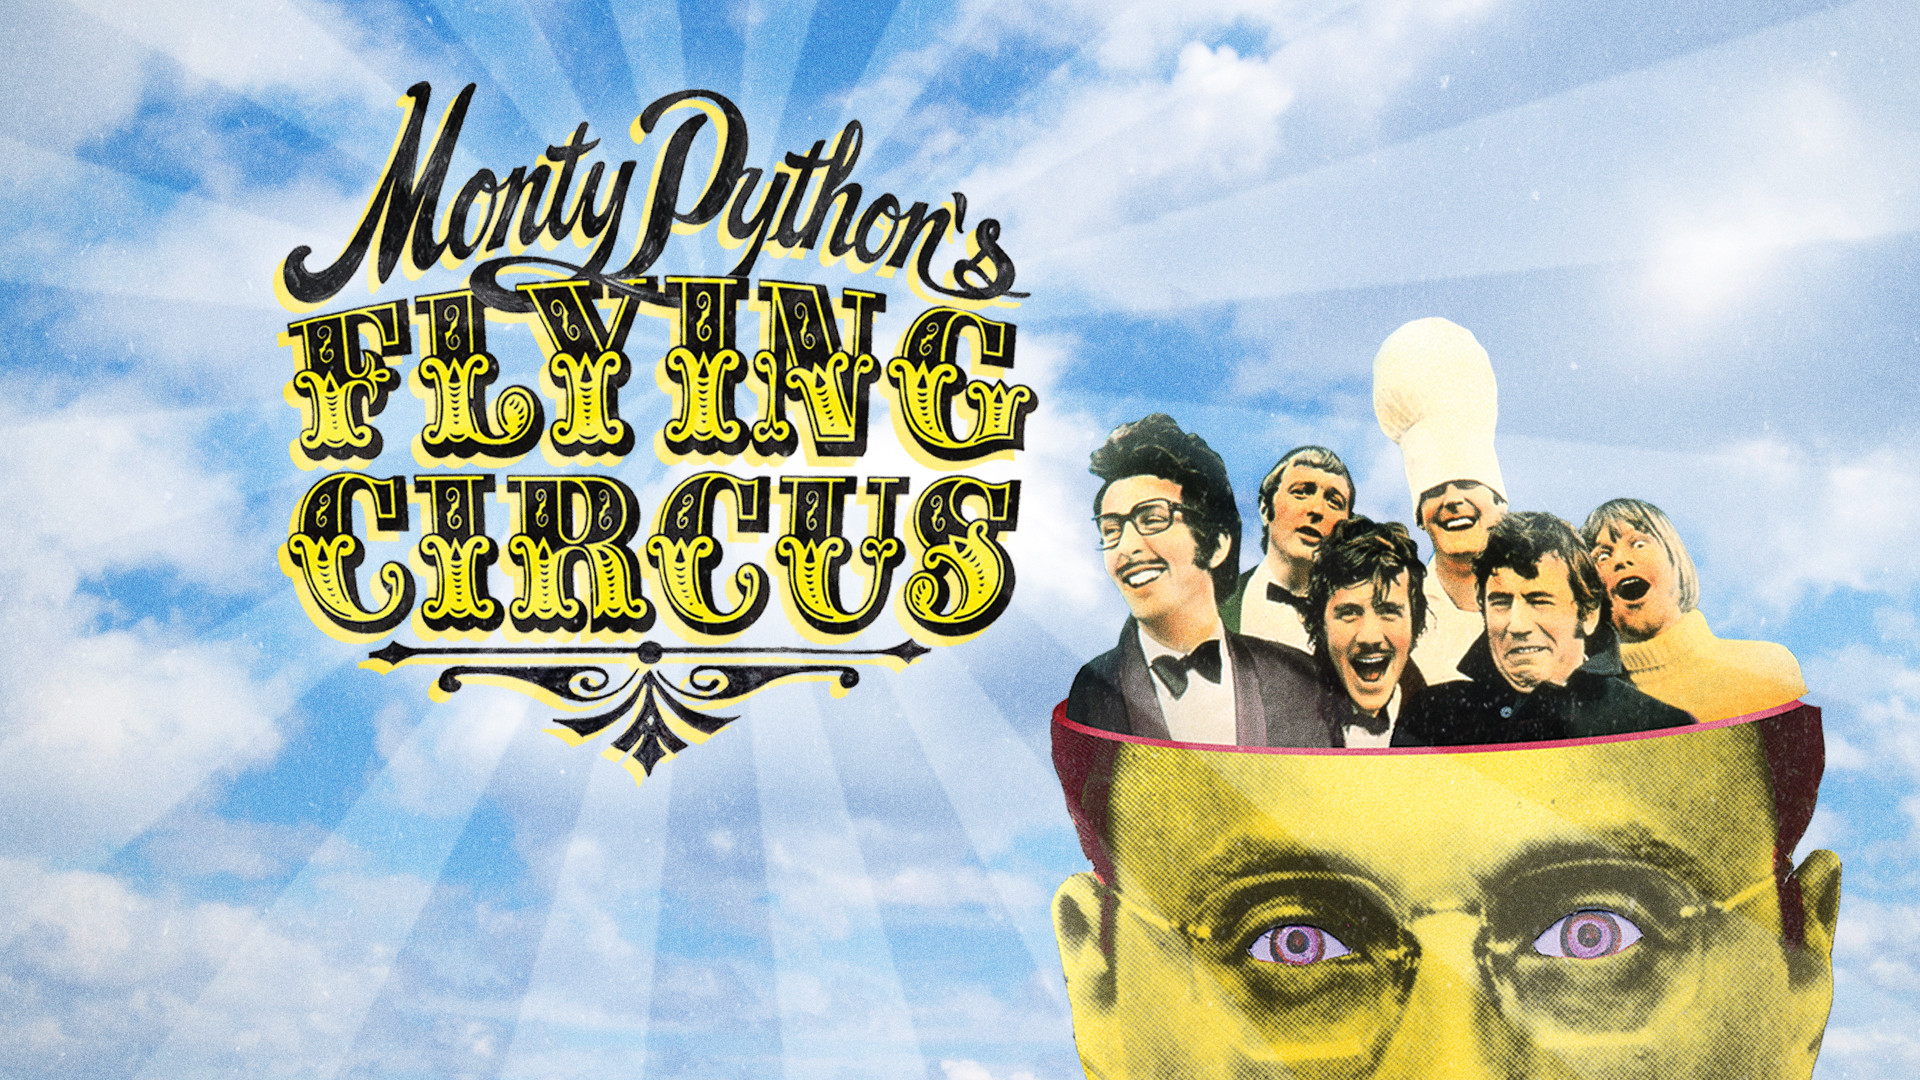 1920x1080 Seeso - Hand-Picked Original & Classic Comedy. Ad-Free. Watch Now. | Monty- python-s-flying-circus